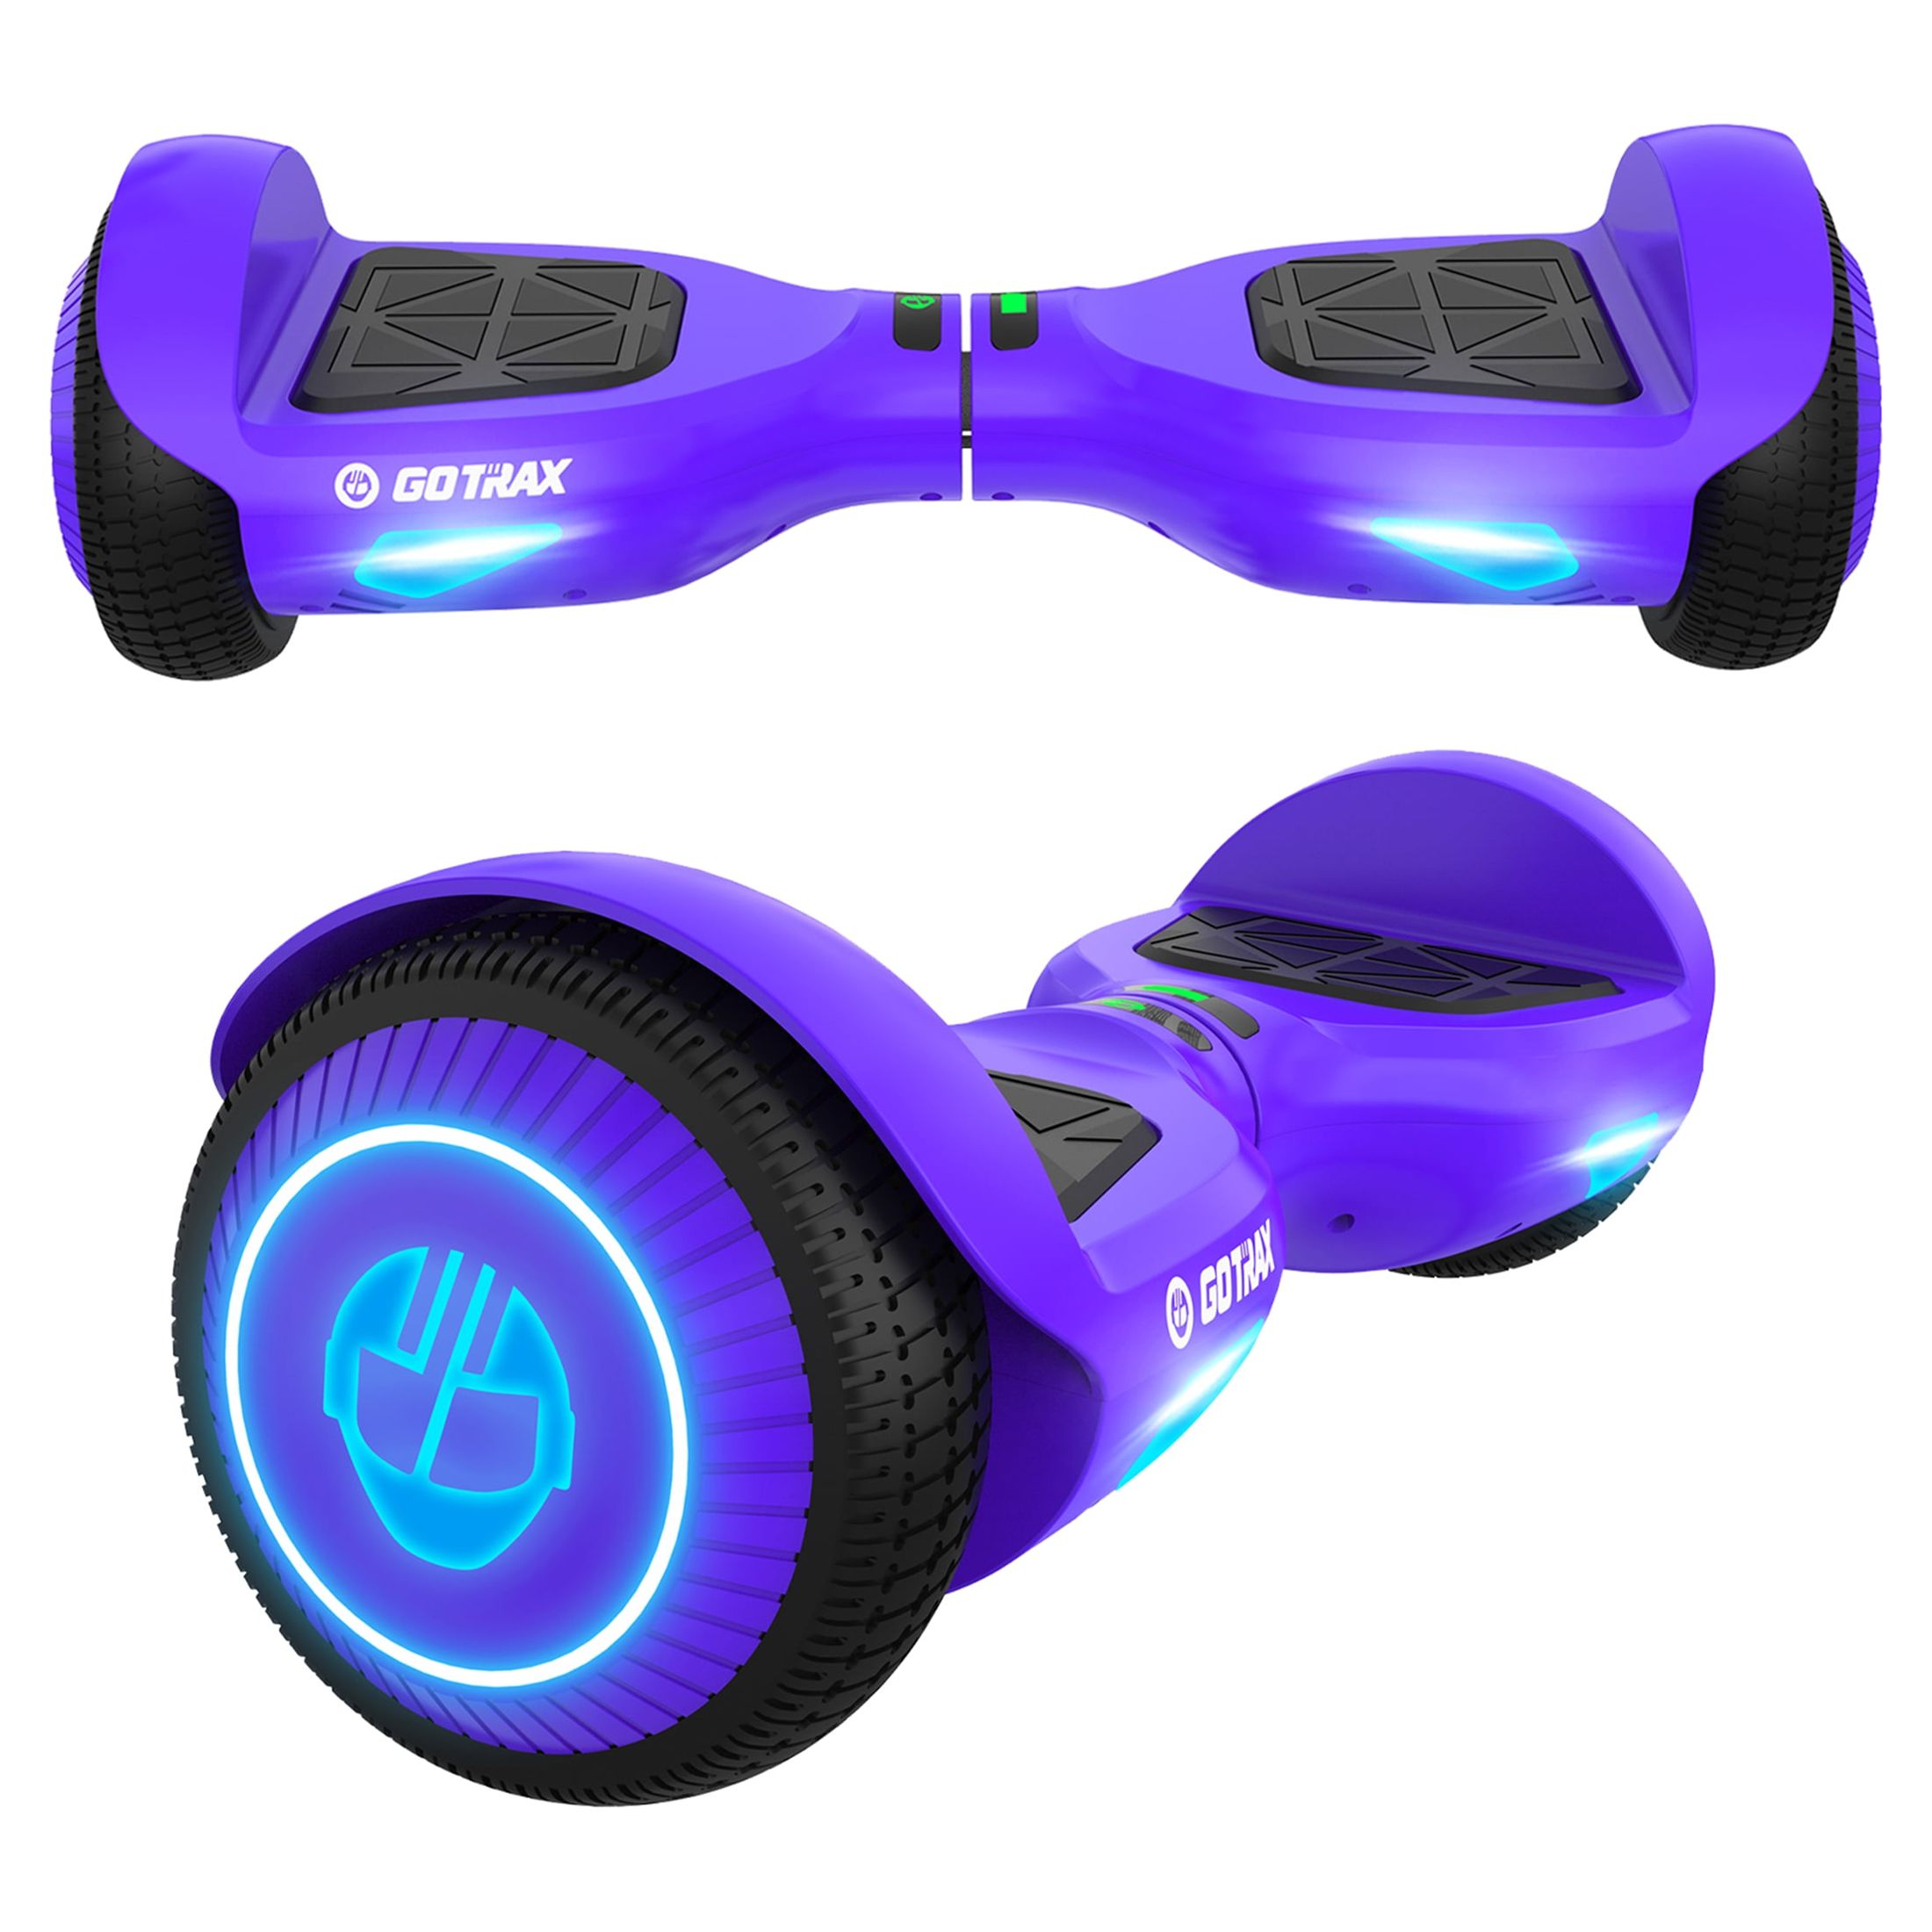 GOTRAX Edge Hoverboard for Kids Adults, 6.5" Tires 6.2mph & 2.5 Miles Self Balancing Scooter, Purple - image 1 of 9